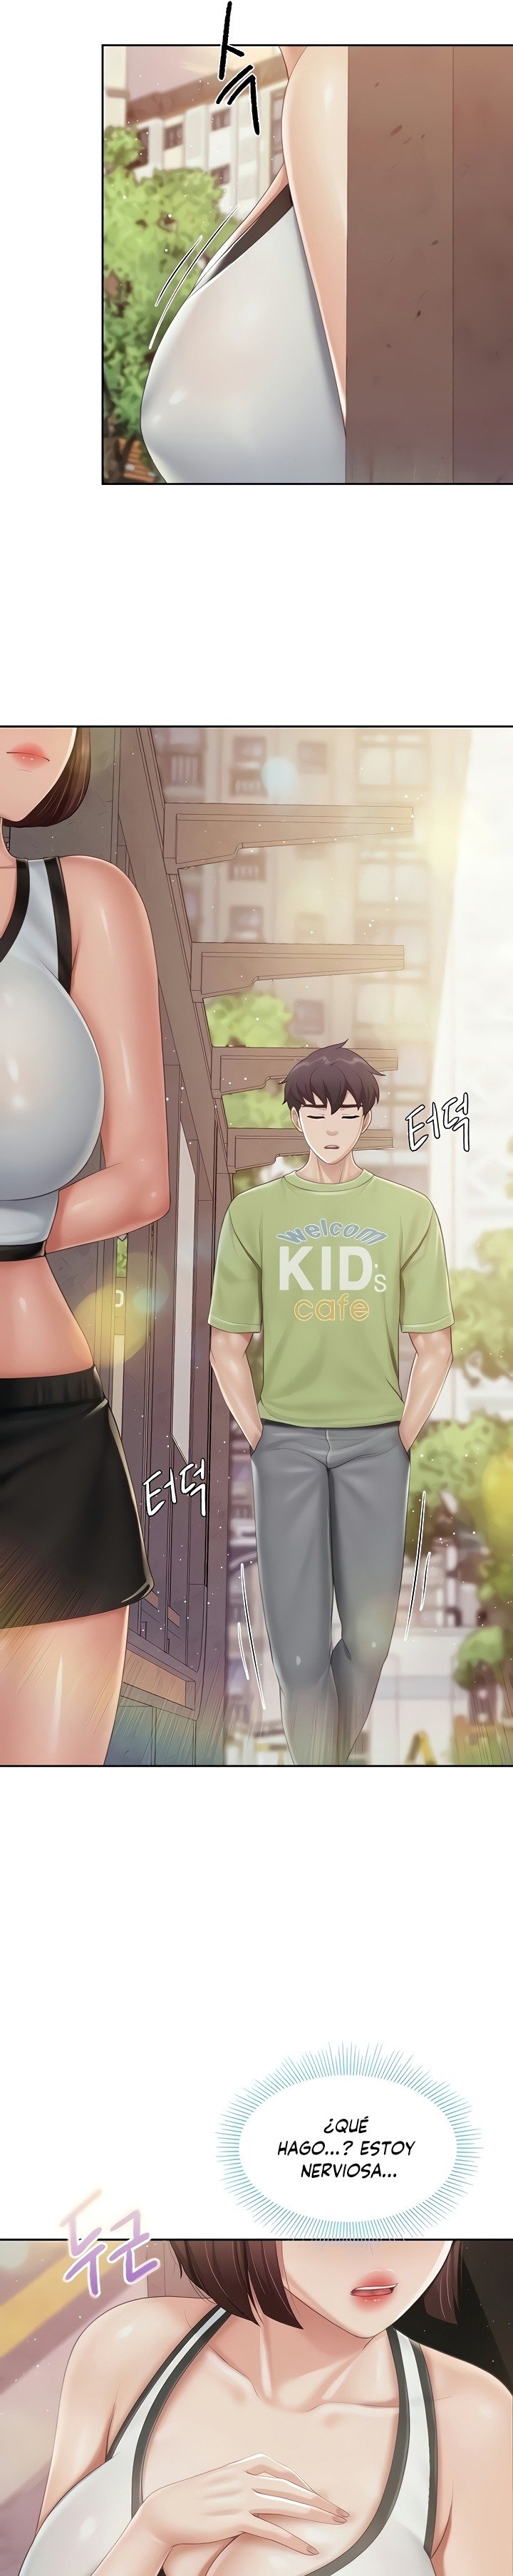 welcome-to-kids-cafe-raw-chap-84-7